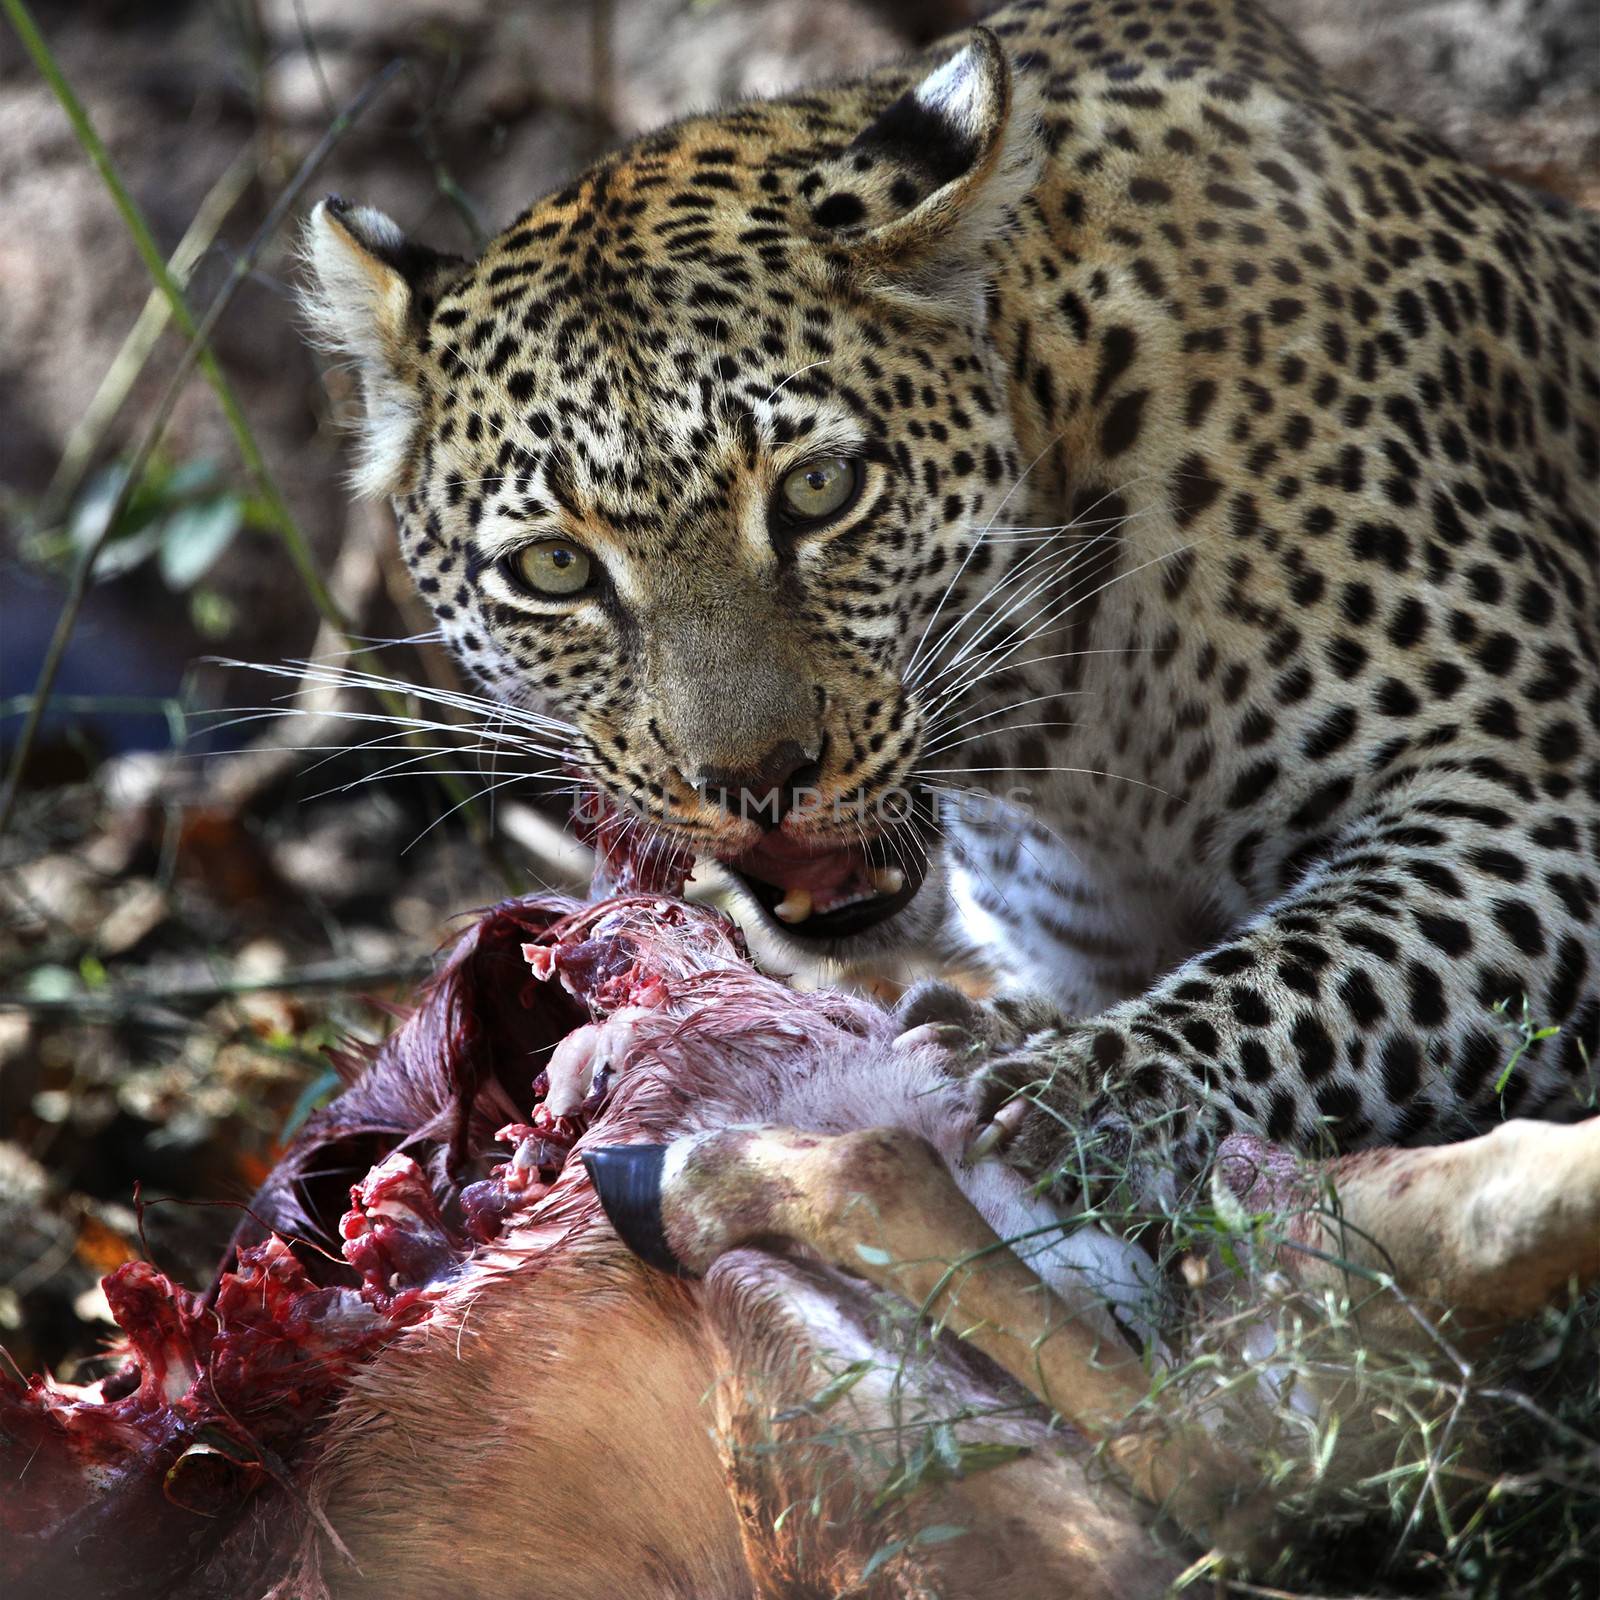 An adult female leopard (Panthera pardus) feeding on its kill of a young Impala near the Khwai River in Botswana in Southern Africa